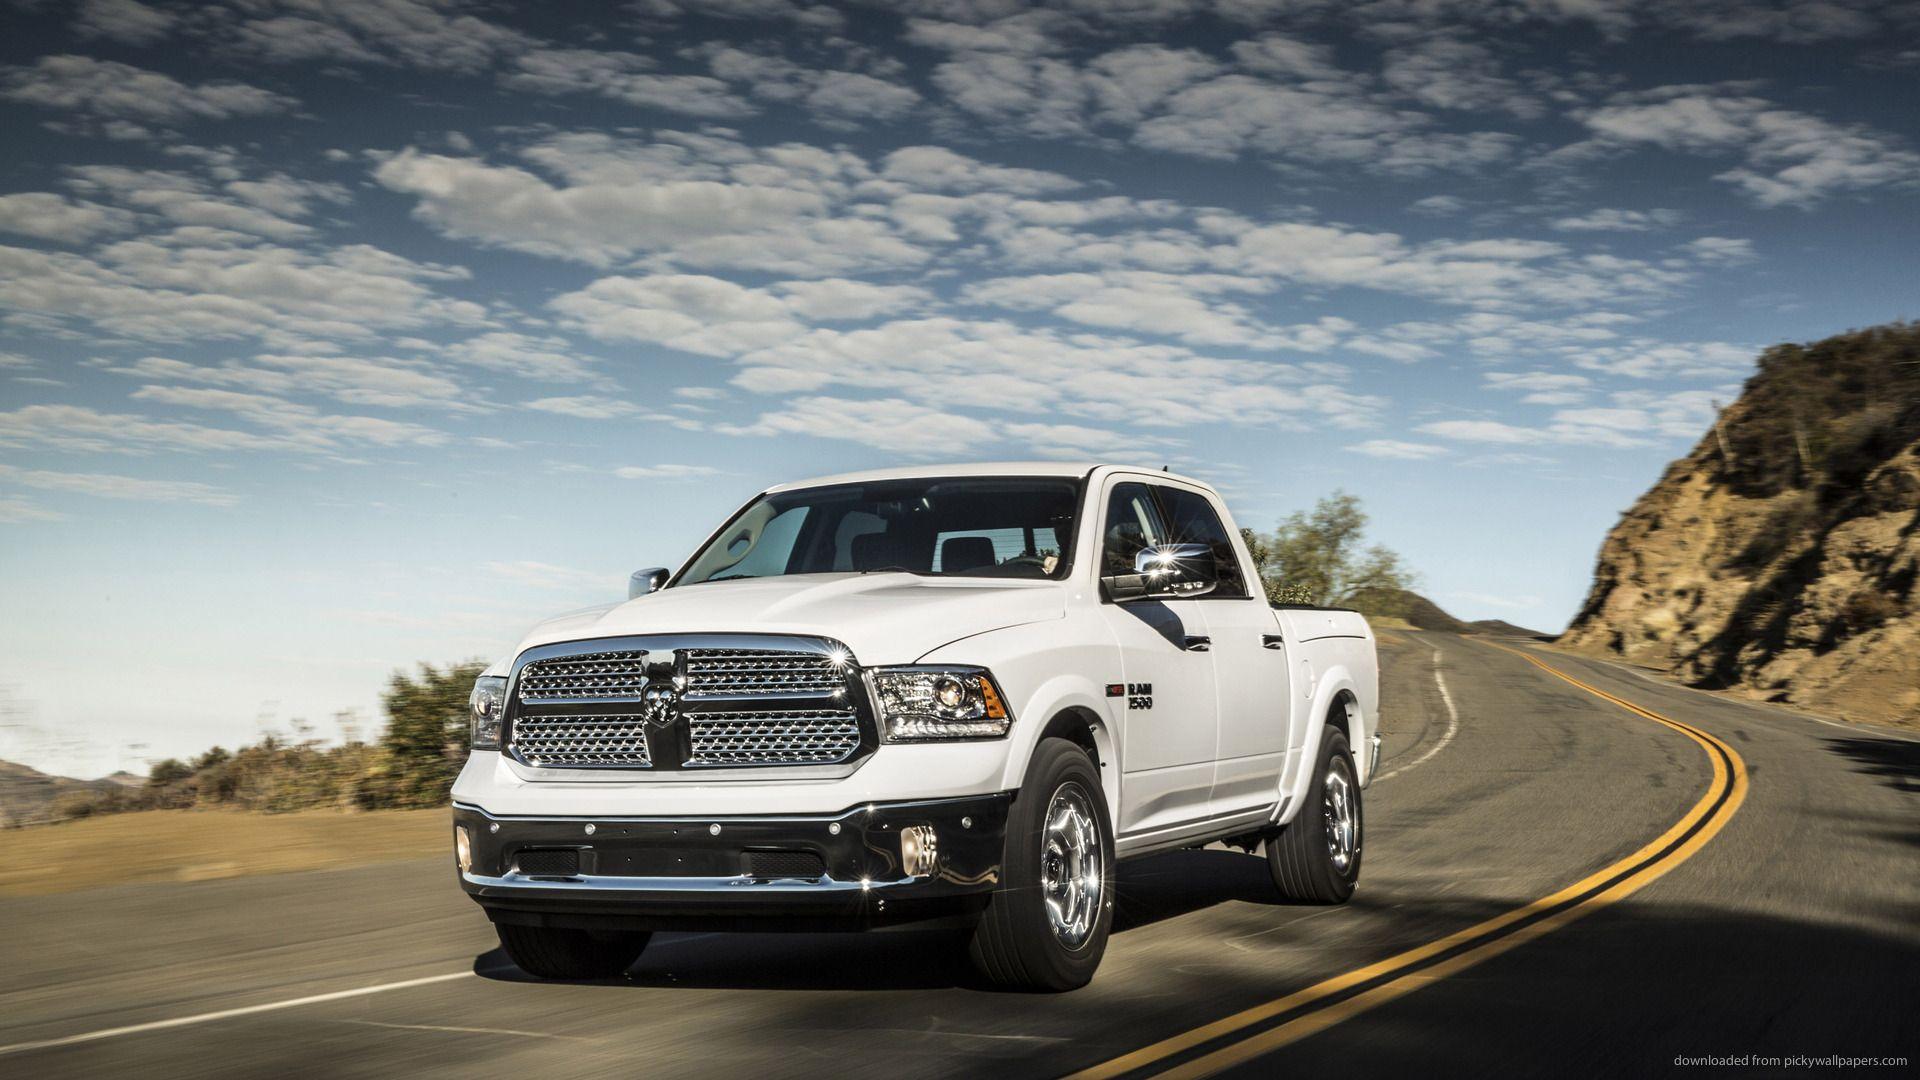 Dodge Ram 1500 Full HD Wallpaper and Background Imagex1080